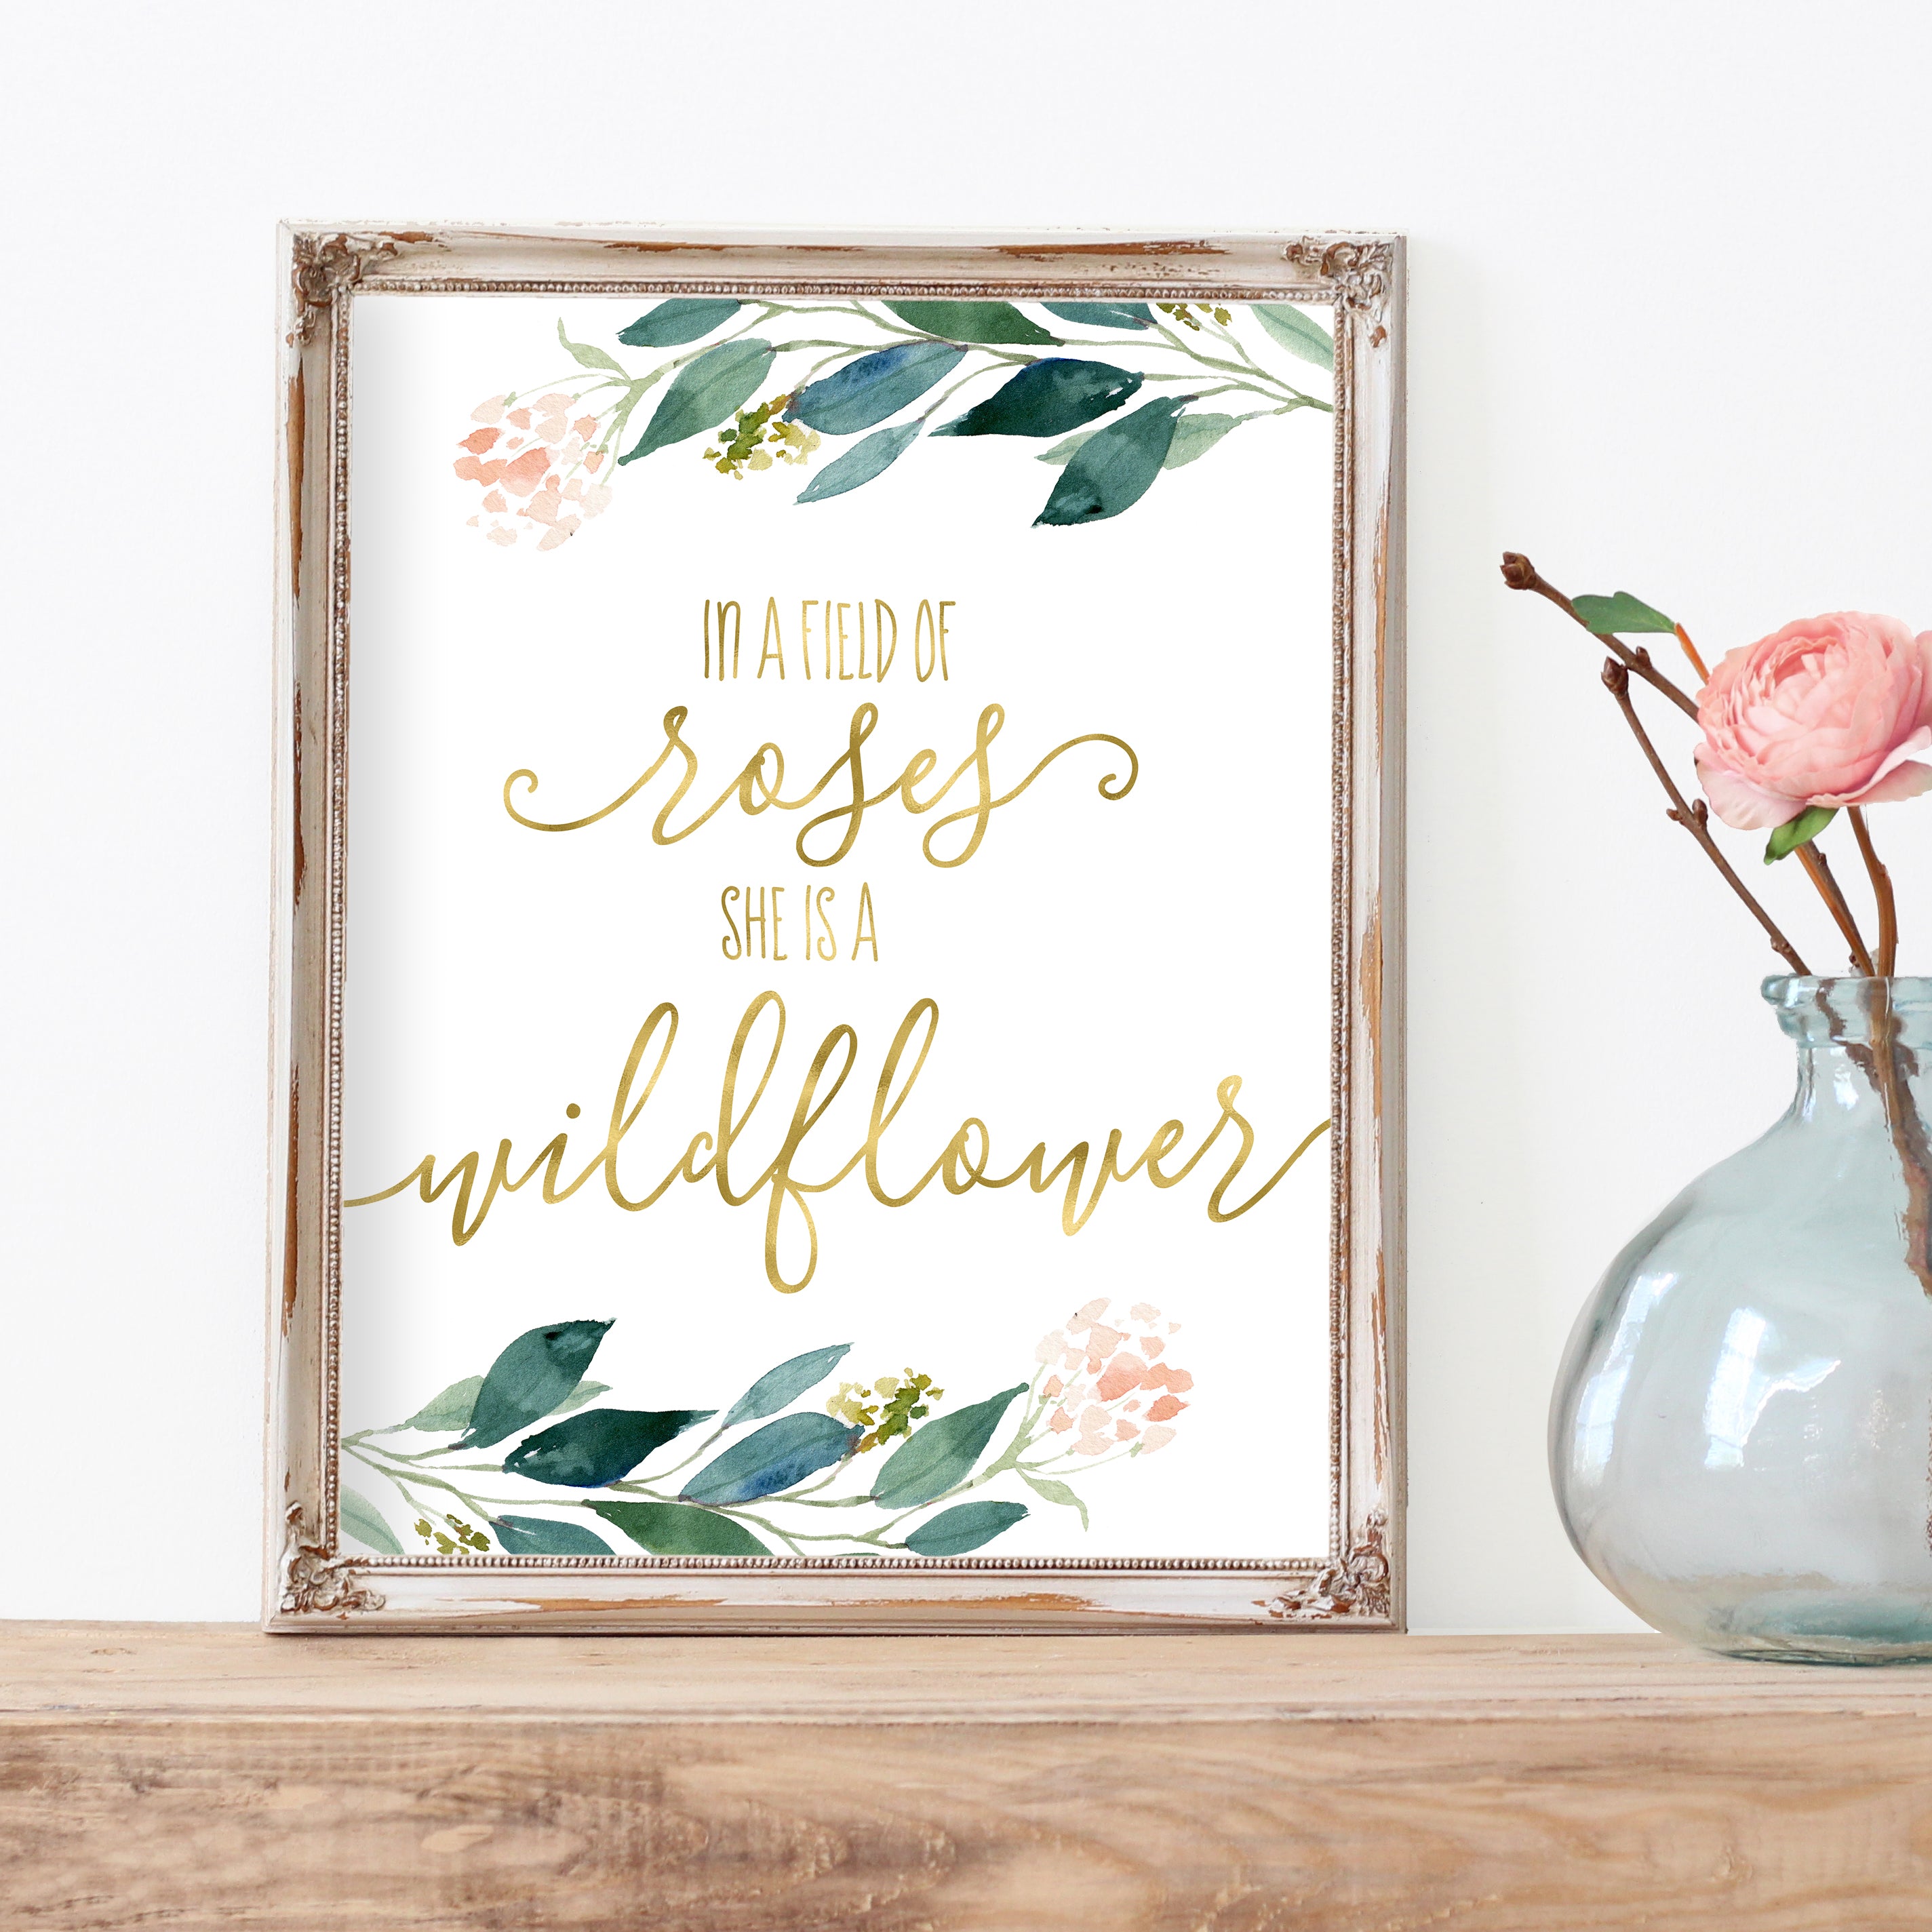 In a Field of Roses She is a Wildflower – B-Cozy Home Decor